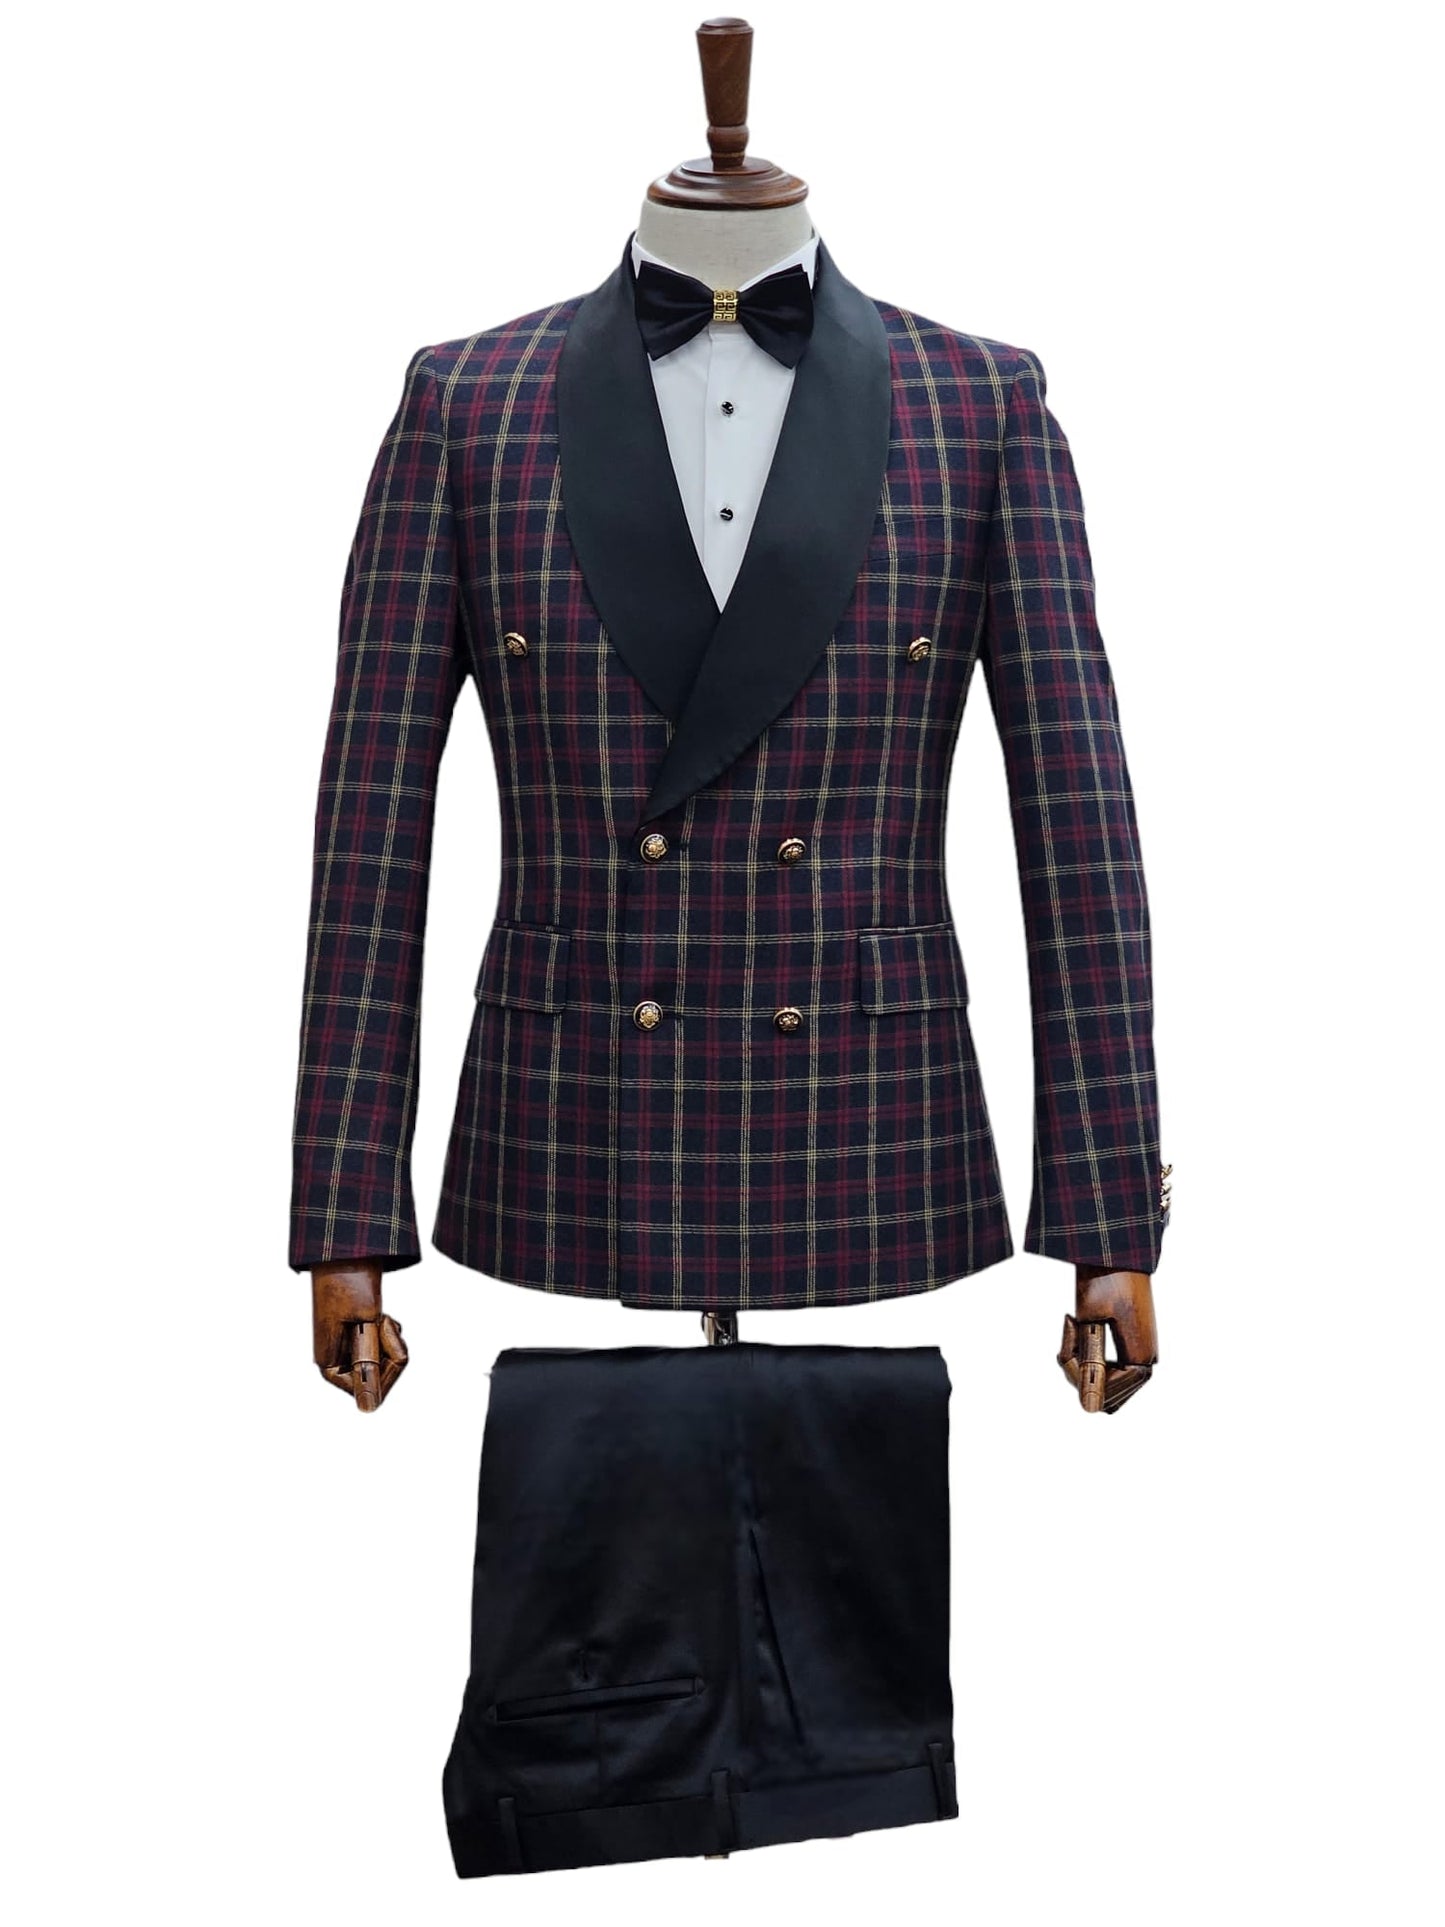 KCT Menswear Navy Plaid Tuxedo - Full Ensemble ideal for weddings and formal events